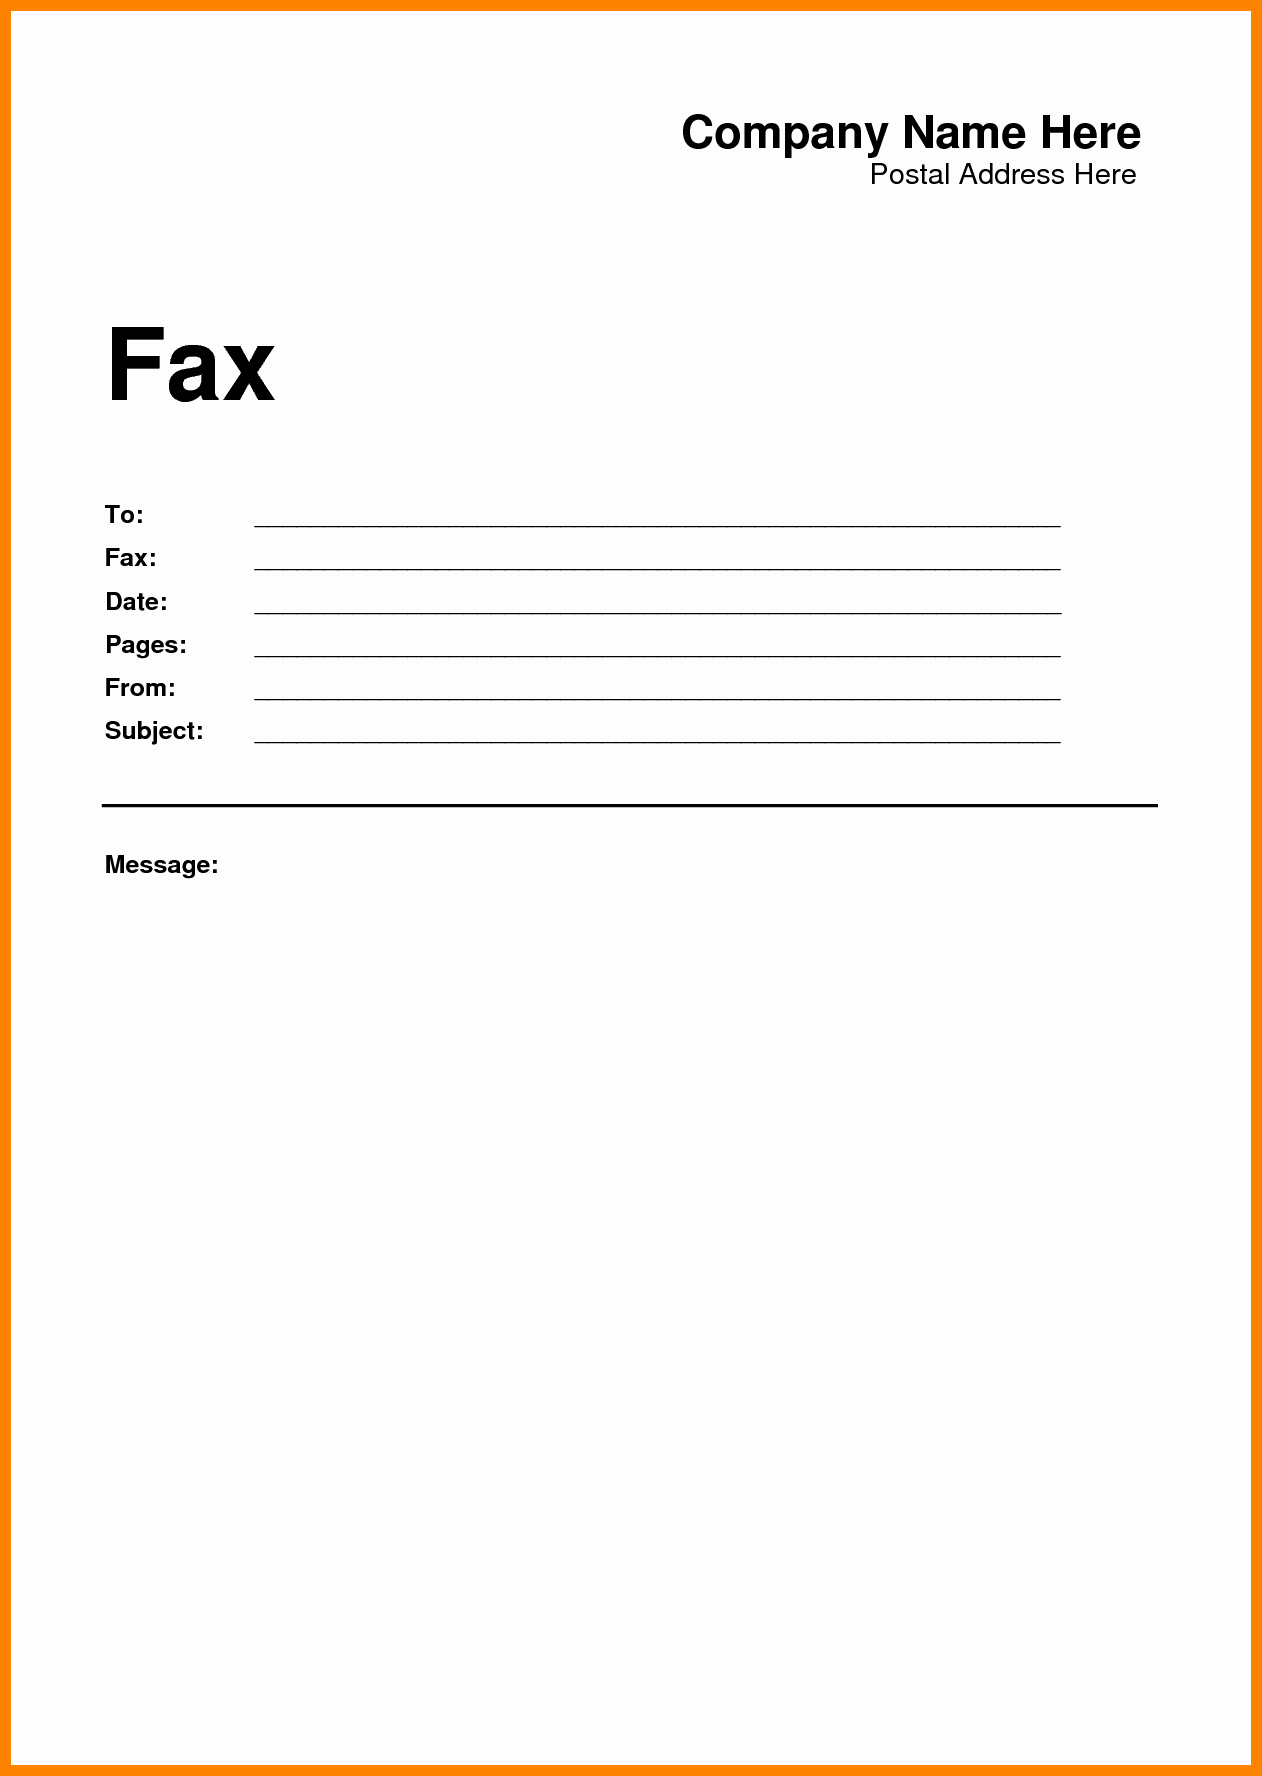 Free Fax Cover Letter Template Lovely 6 Free Fax Cover Sheet